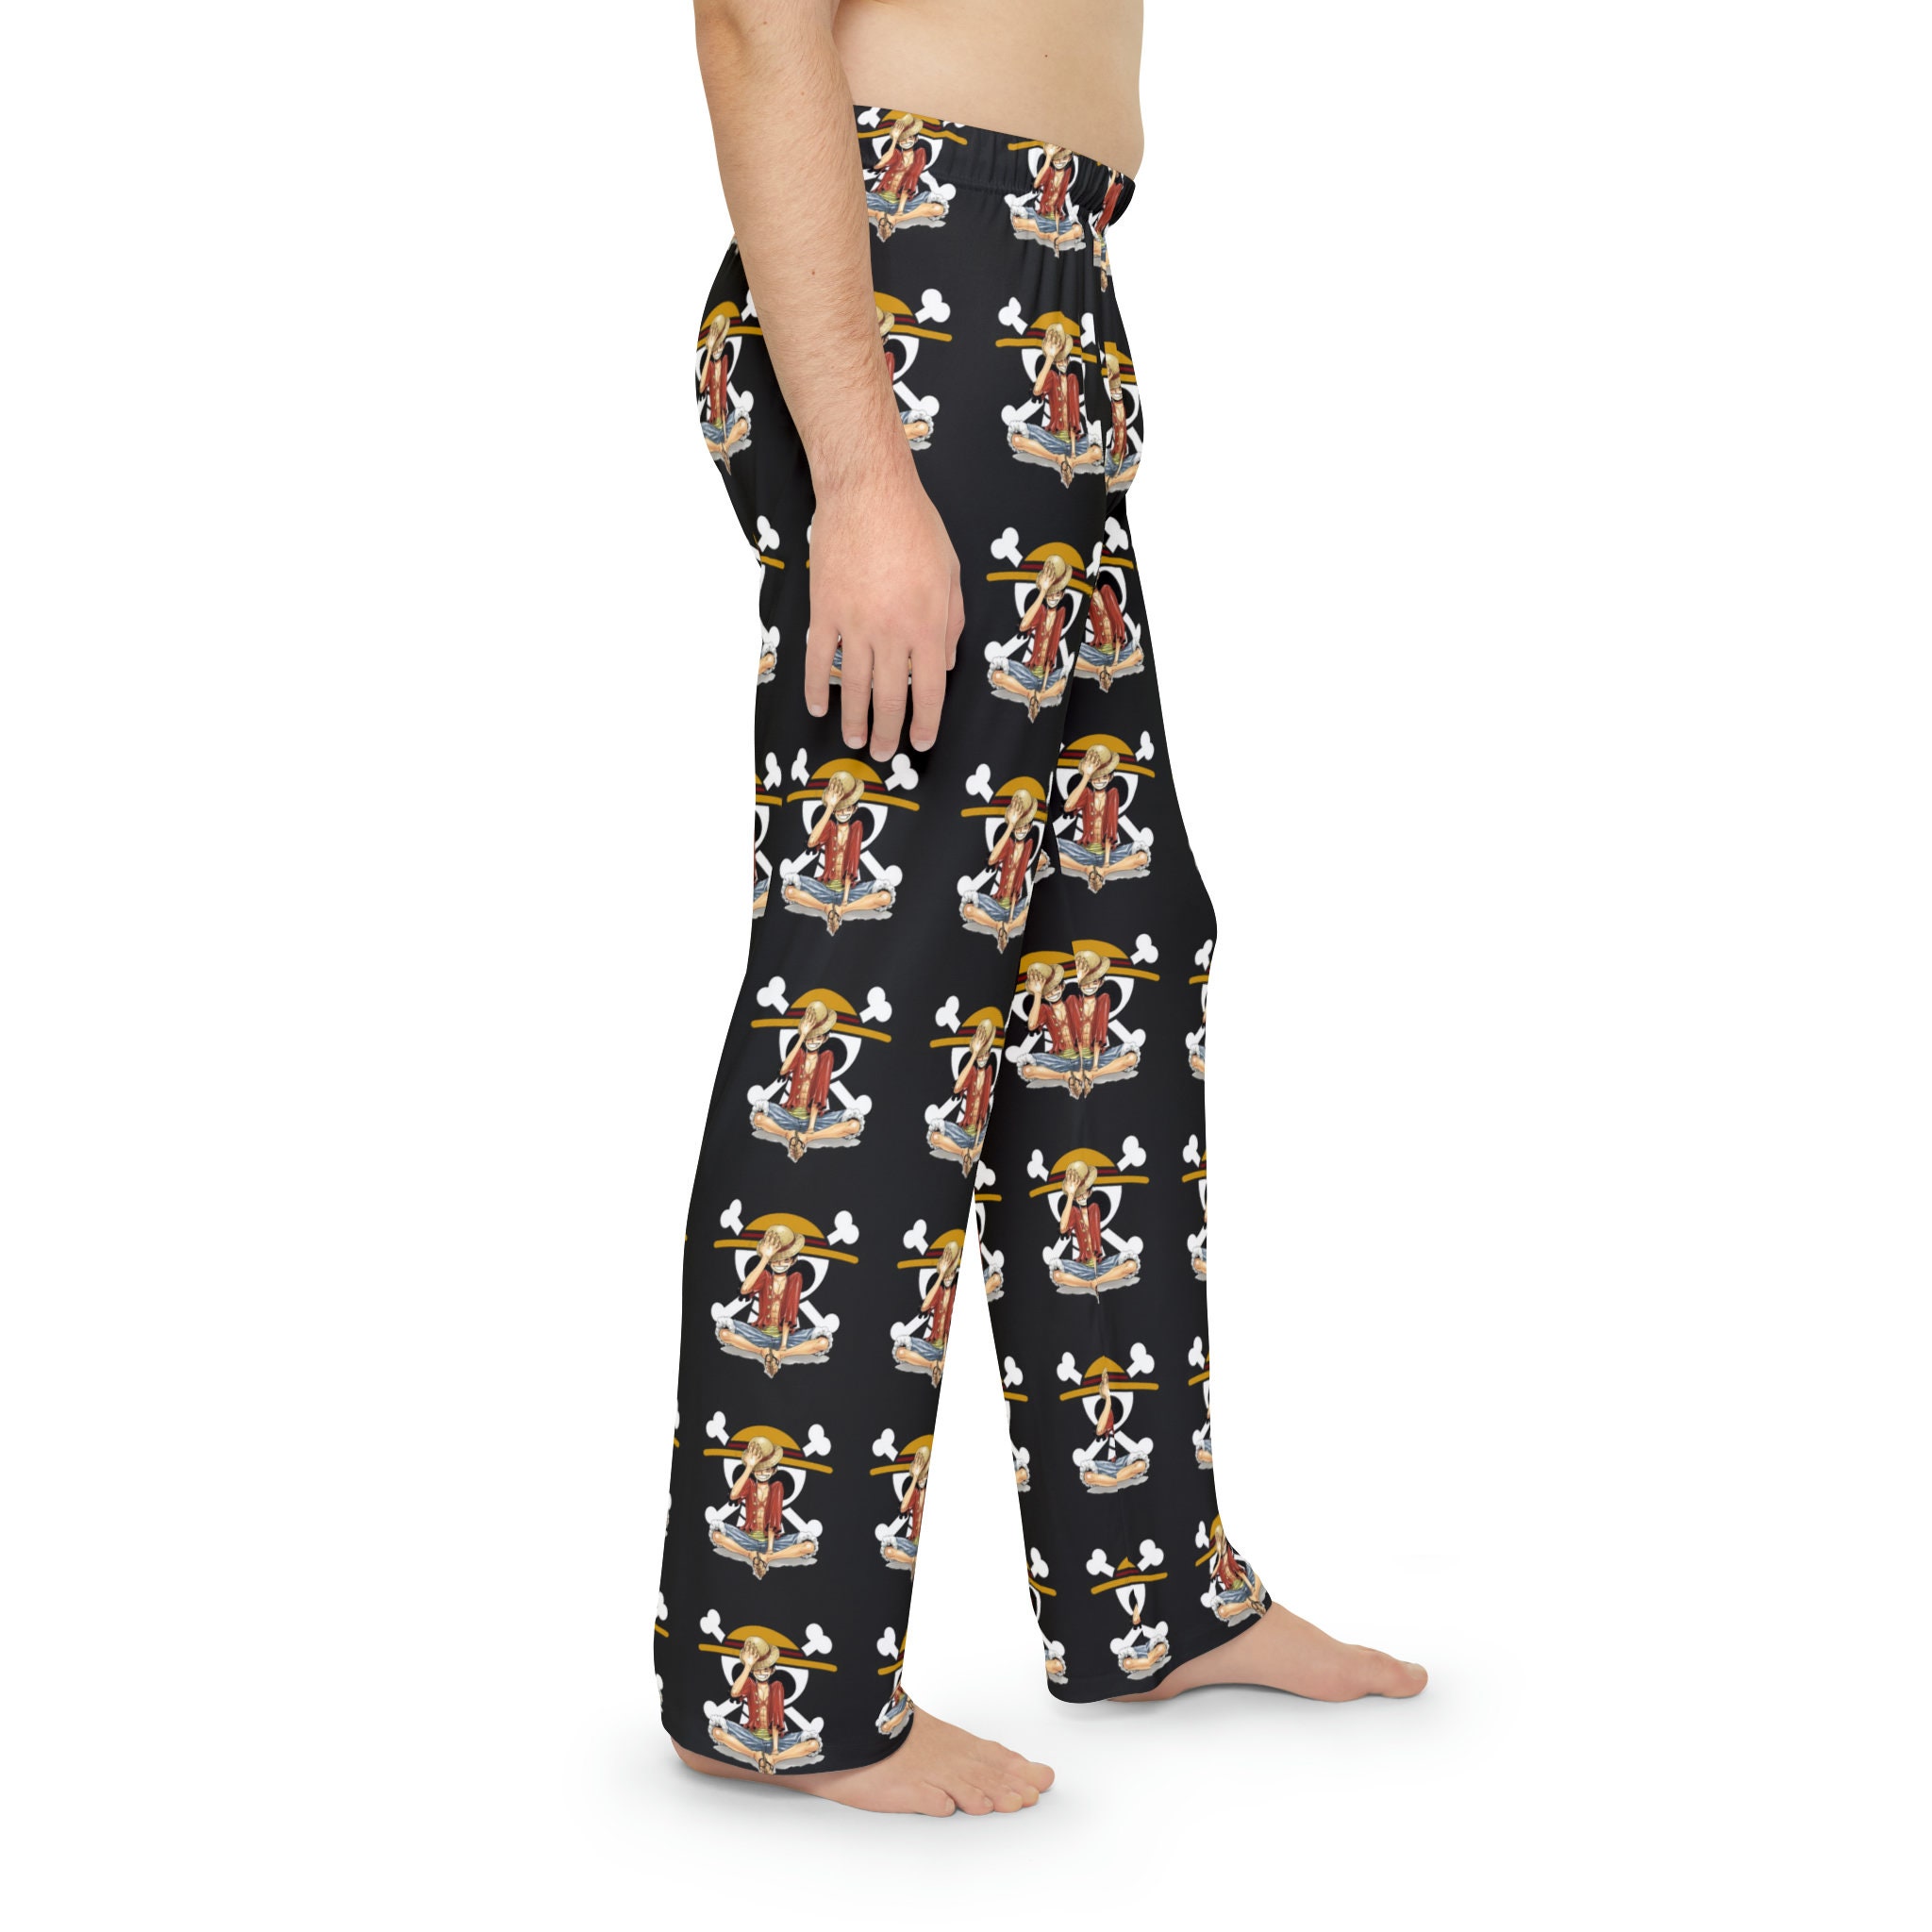 One Piece Collection Men's Pajama Pants - Etsy